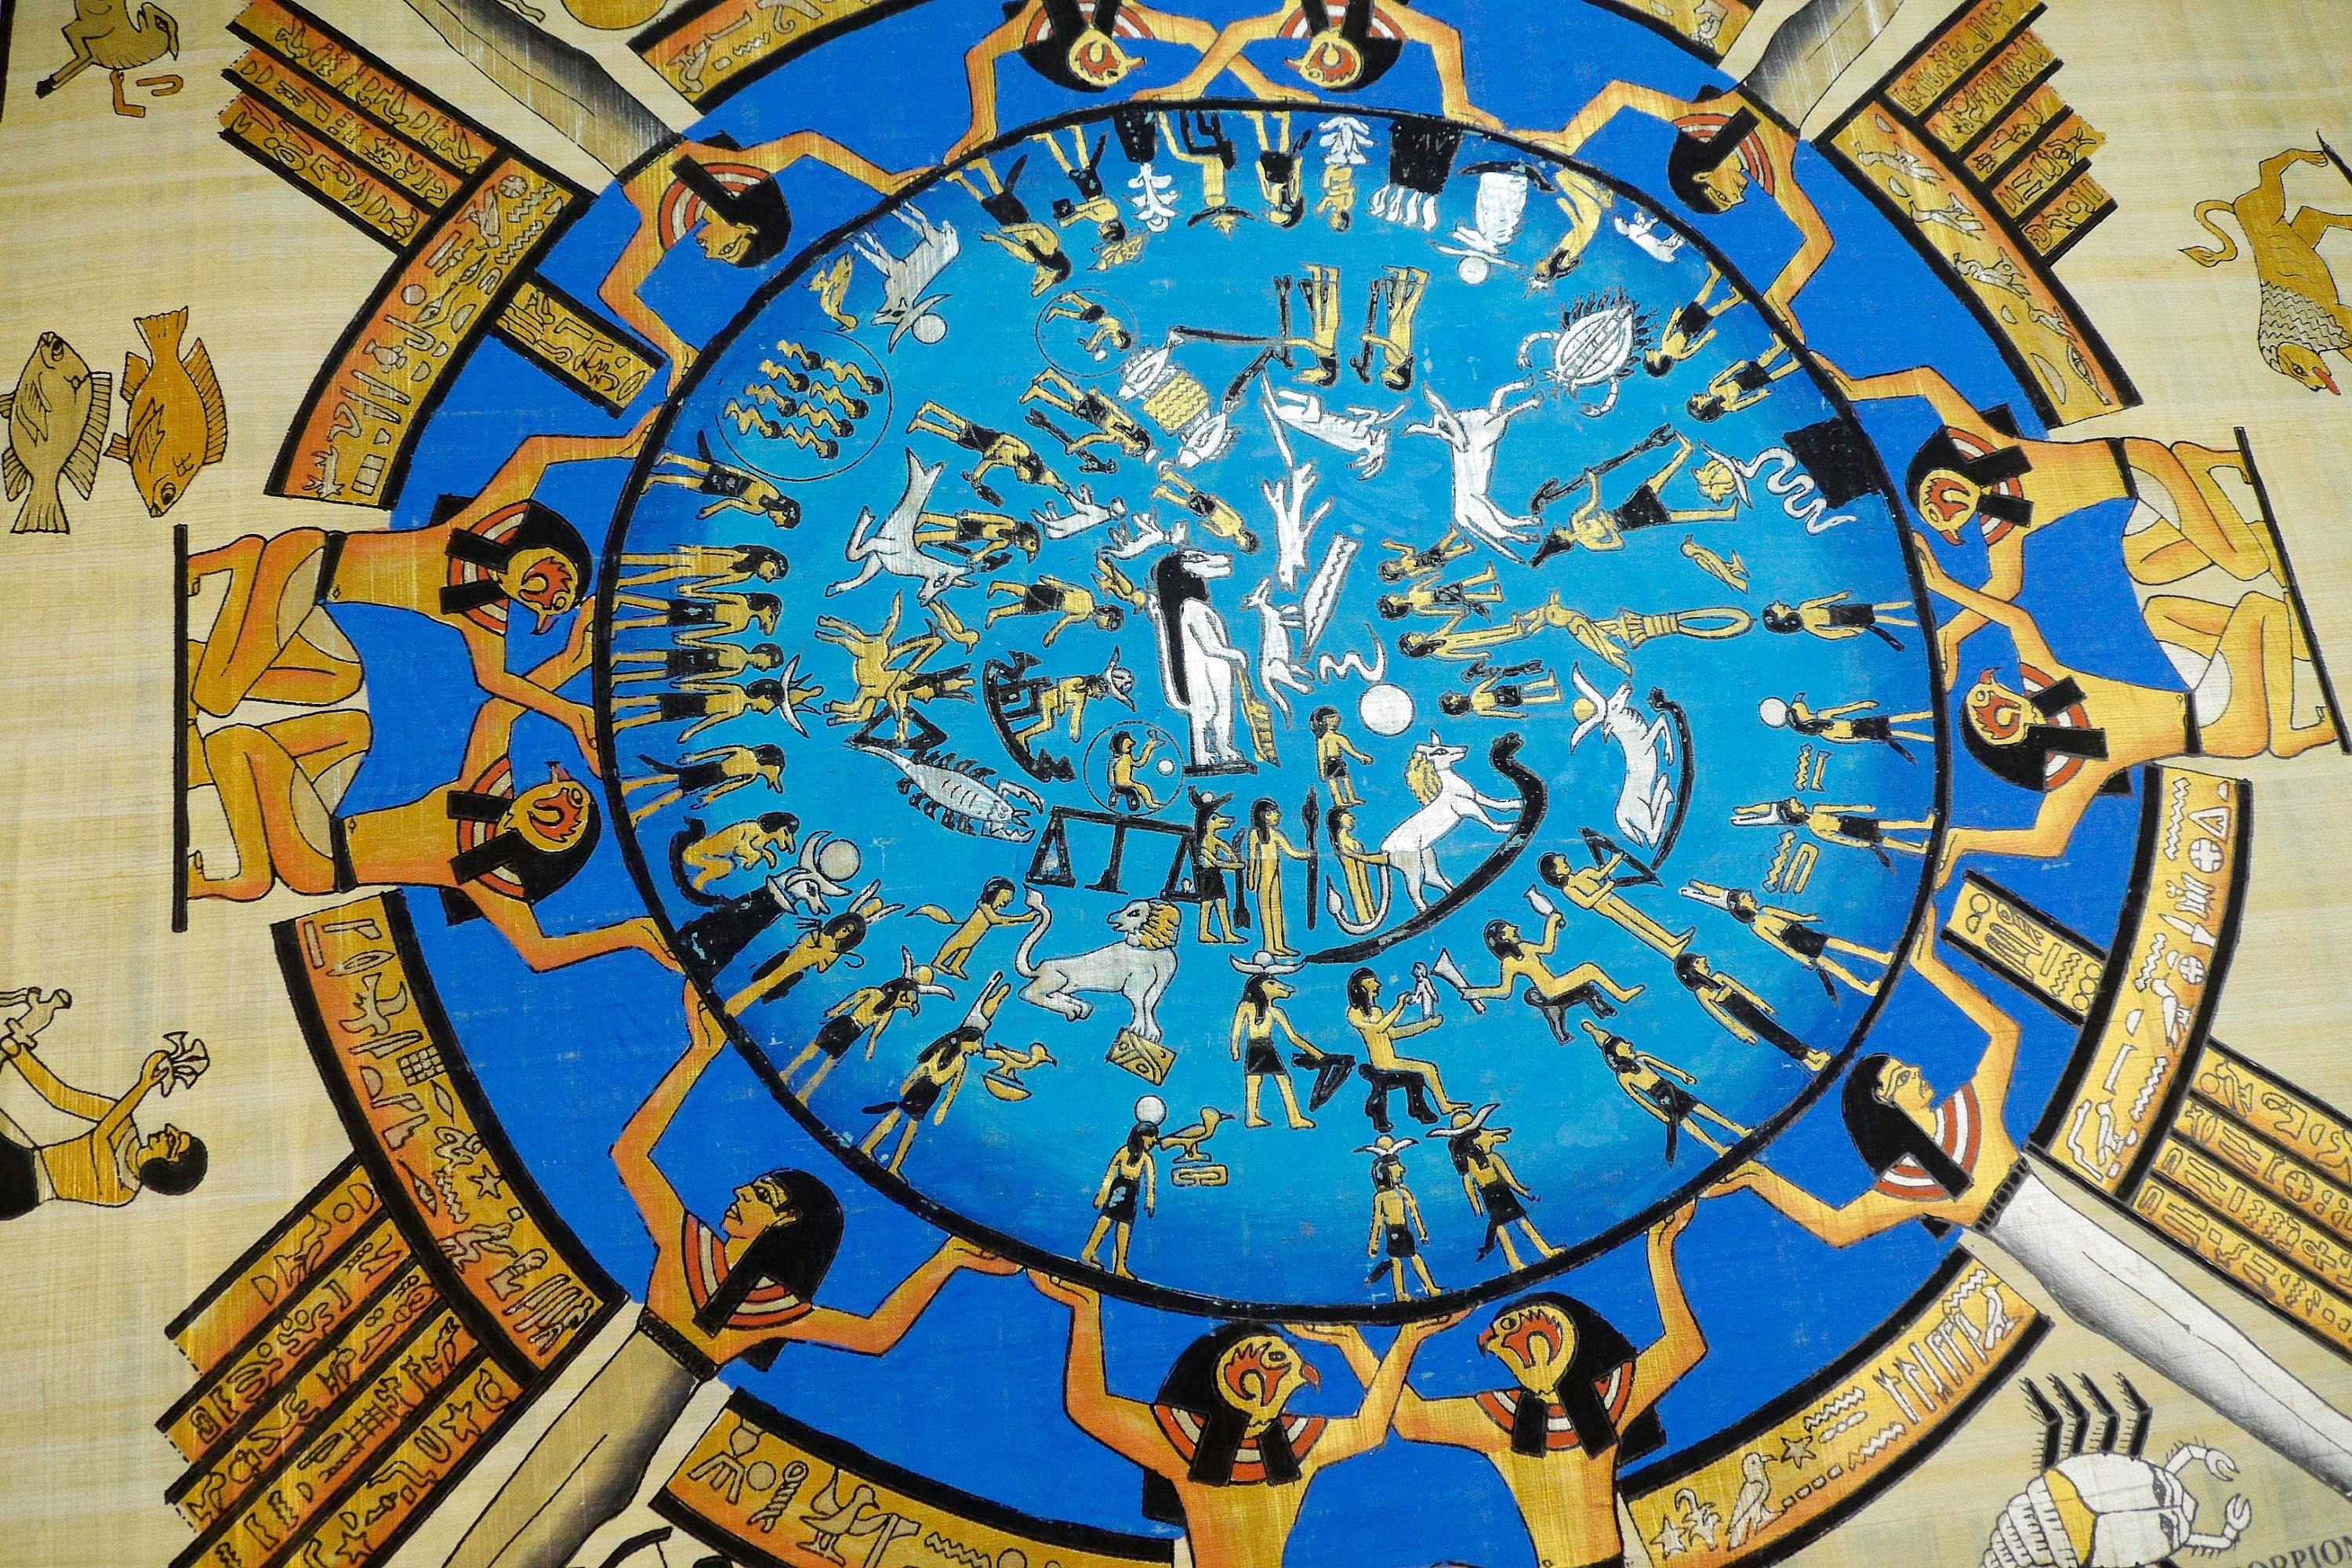 Ancient Egyptian calendar with all the zodiac signs